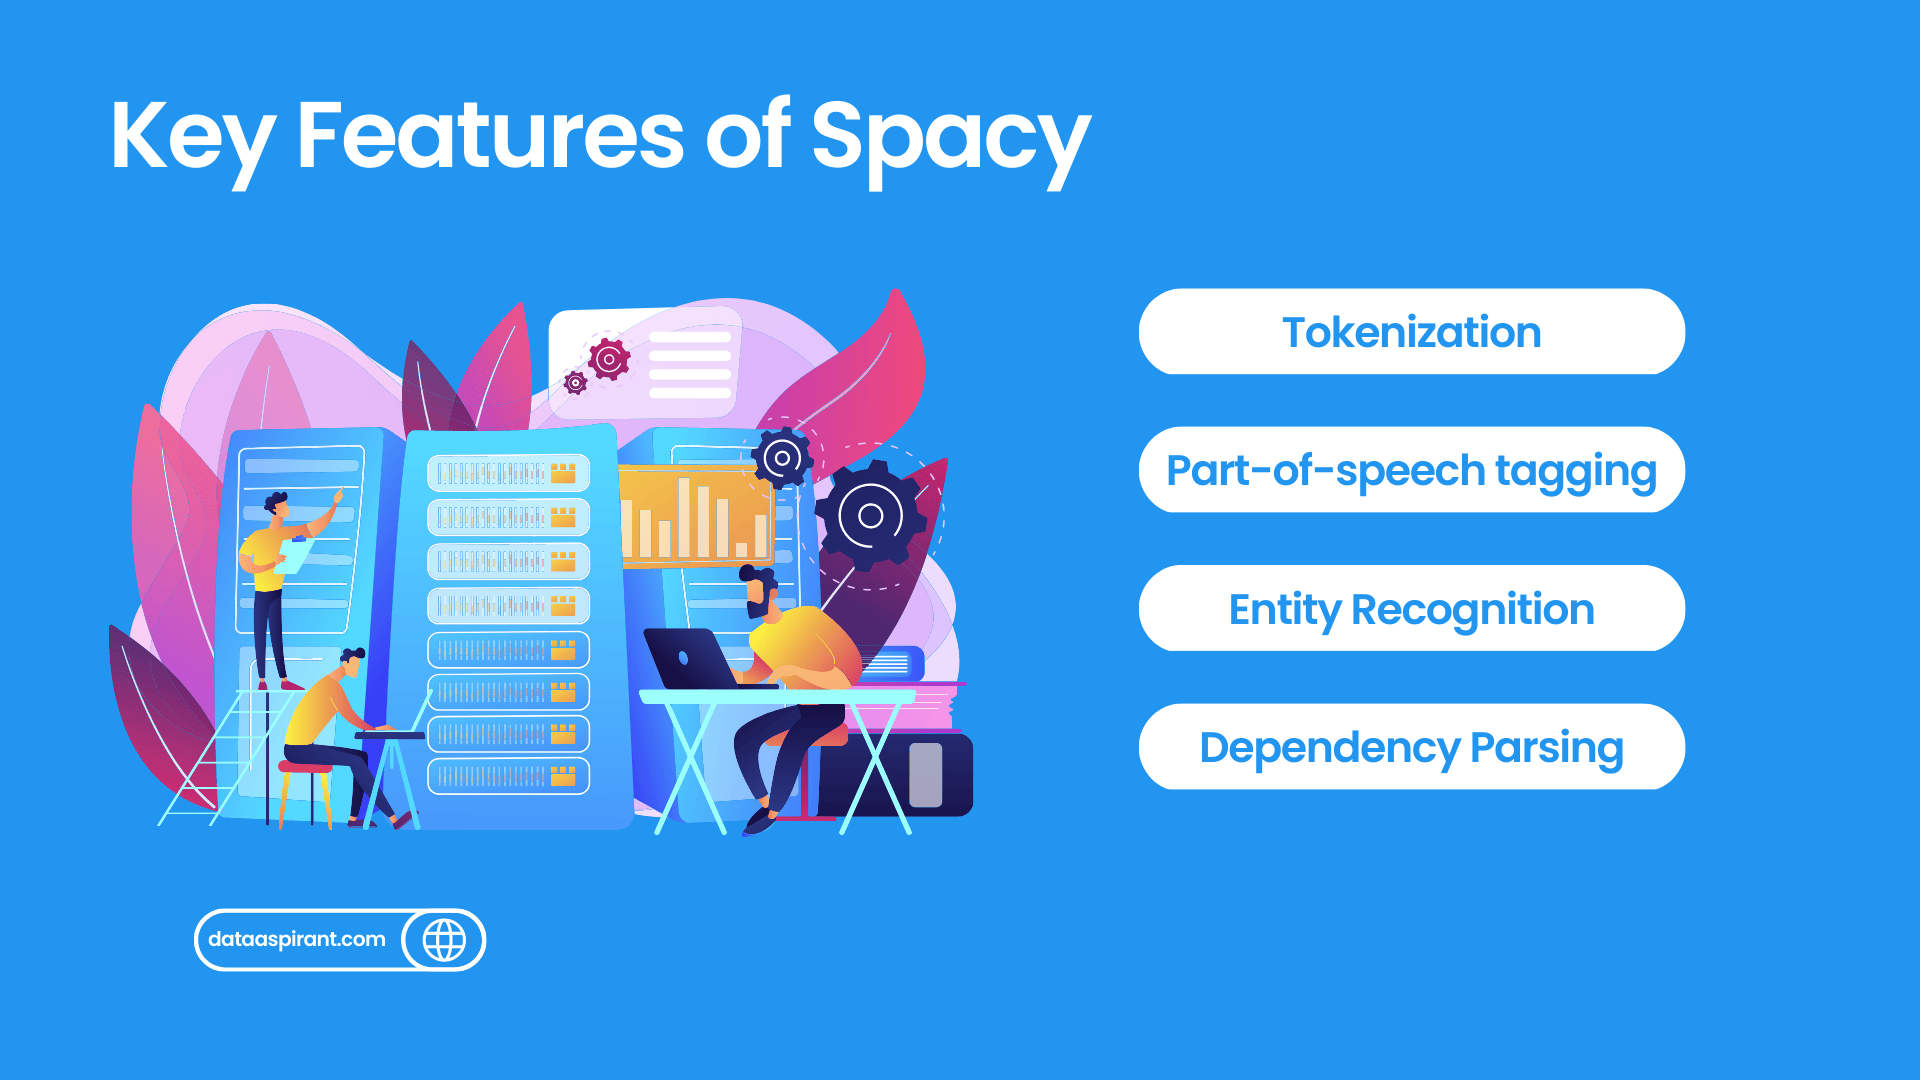 Key Features of Spacy